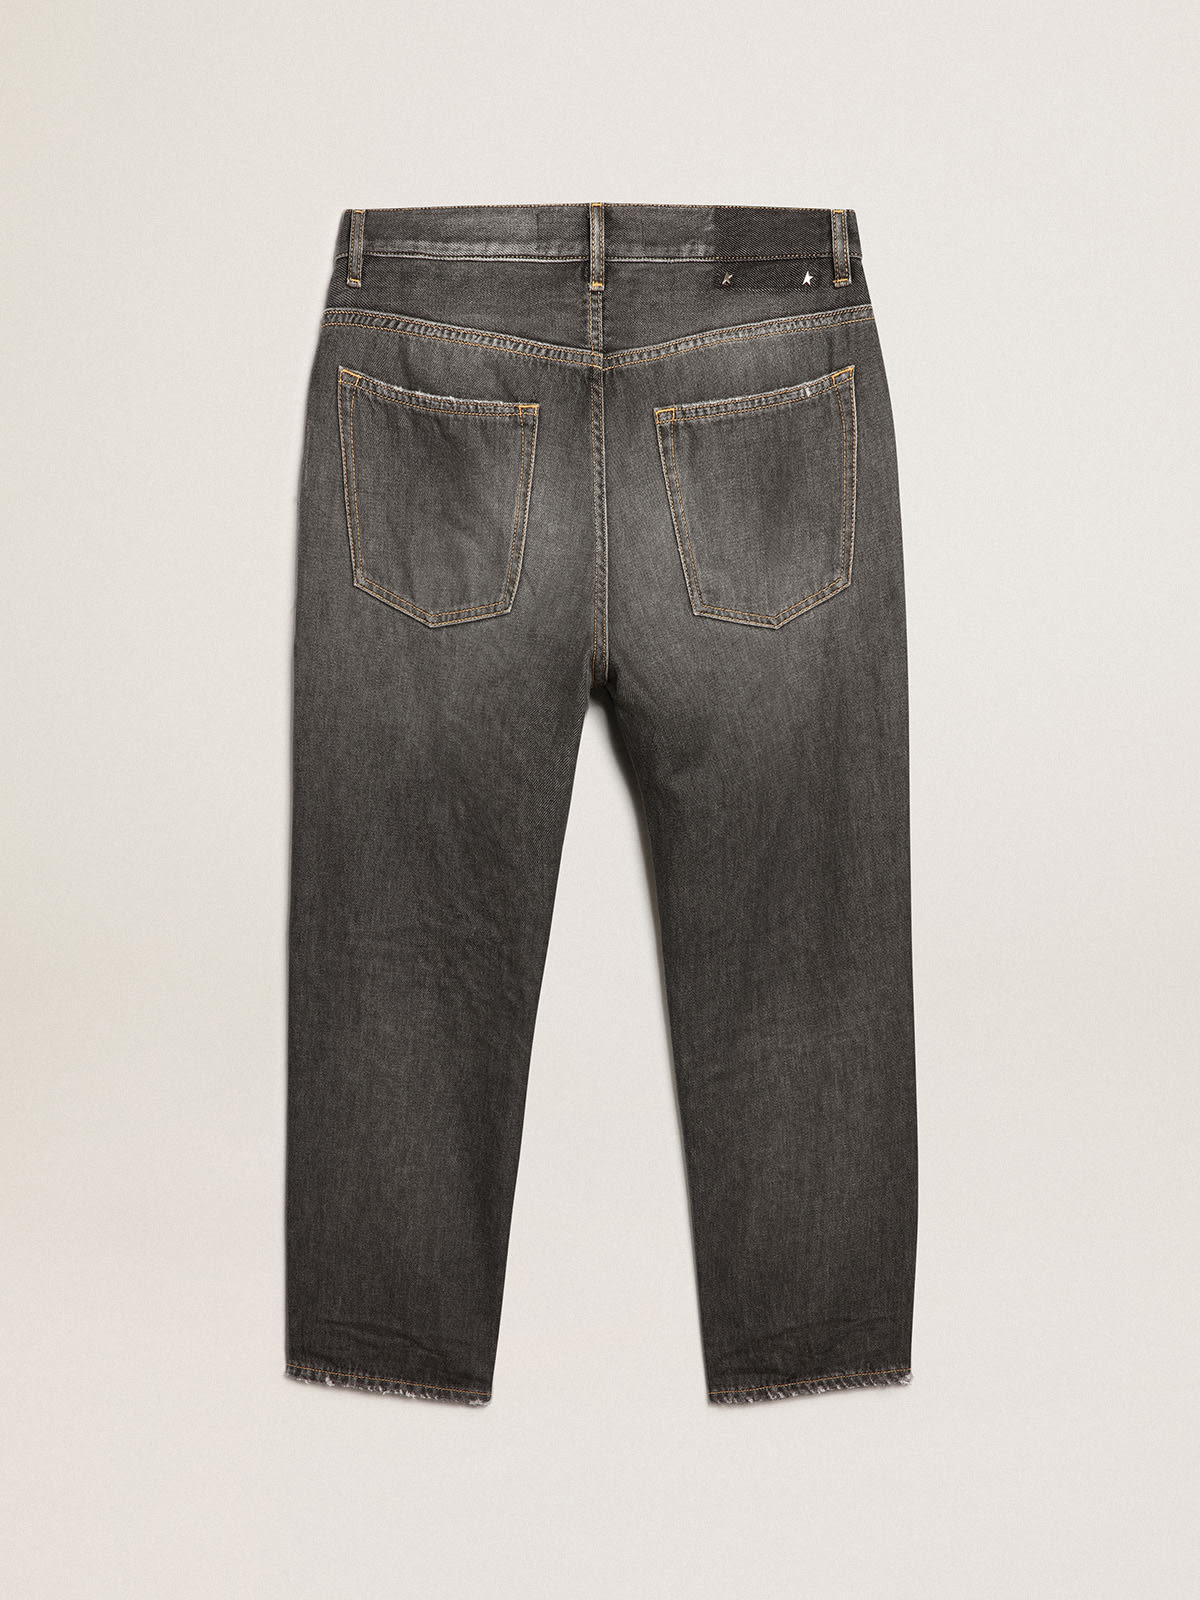 Golden Goose - Men's black jeans with stonewashed effect in 